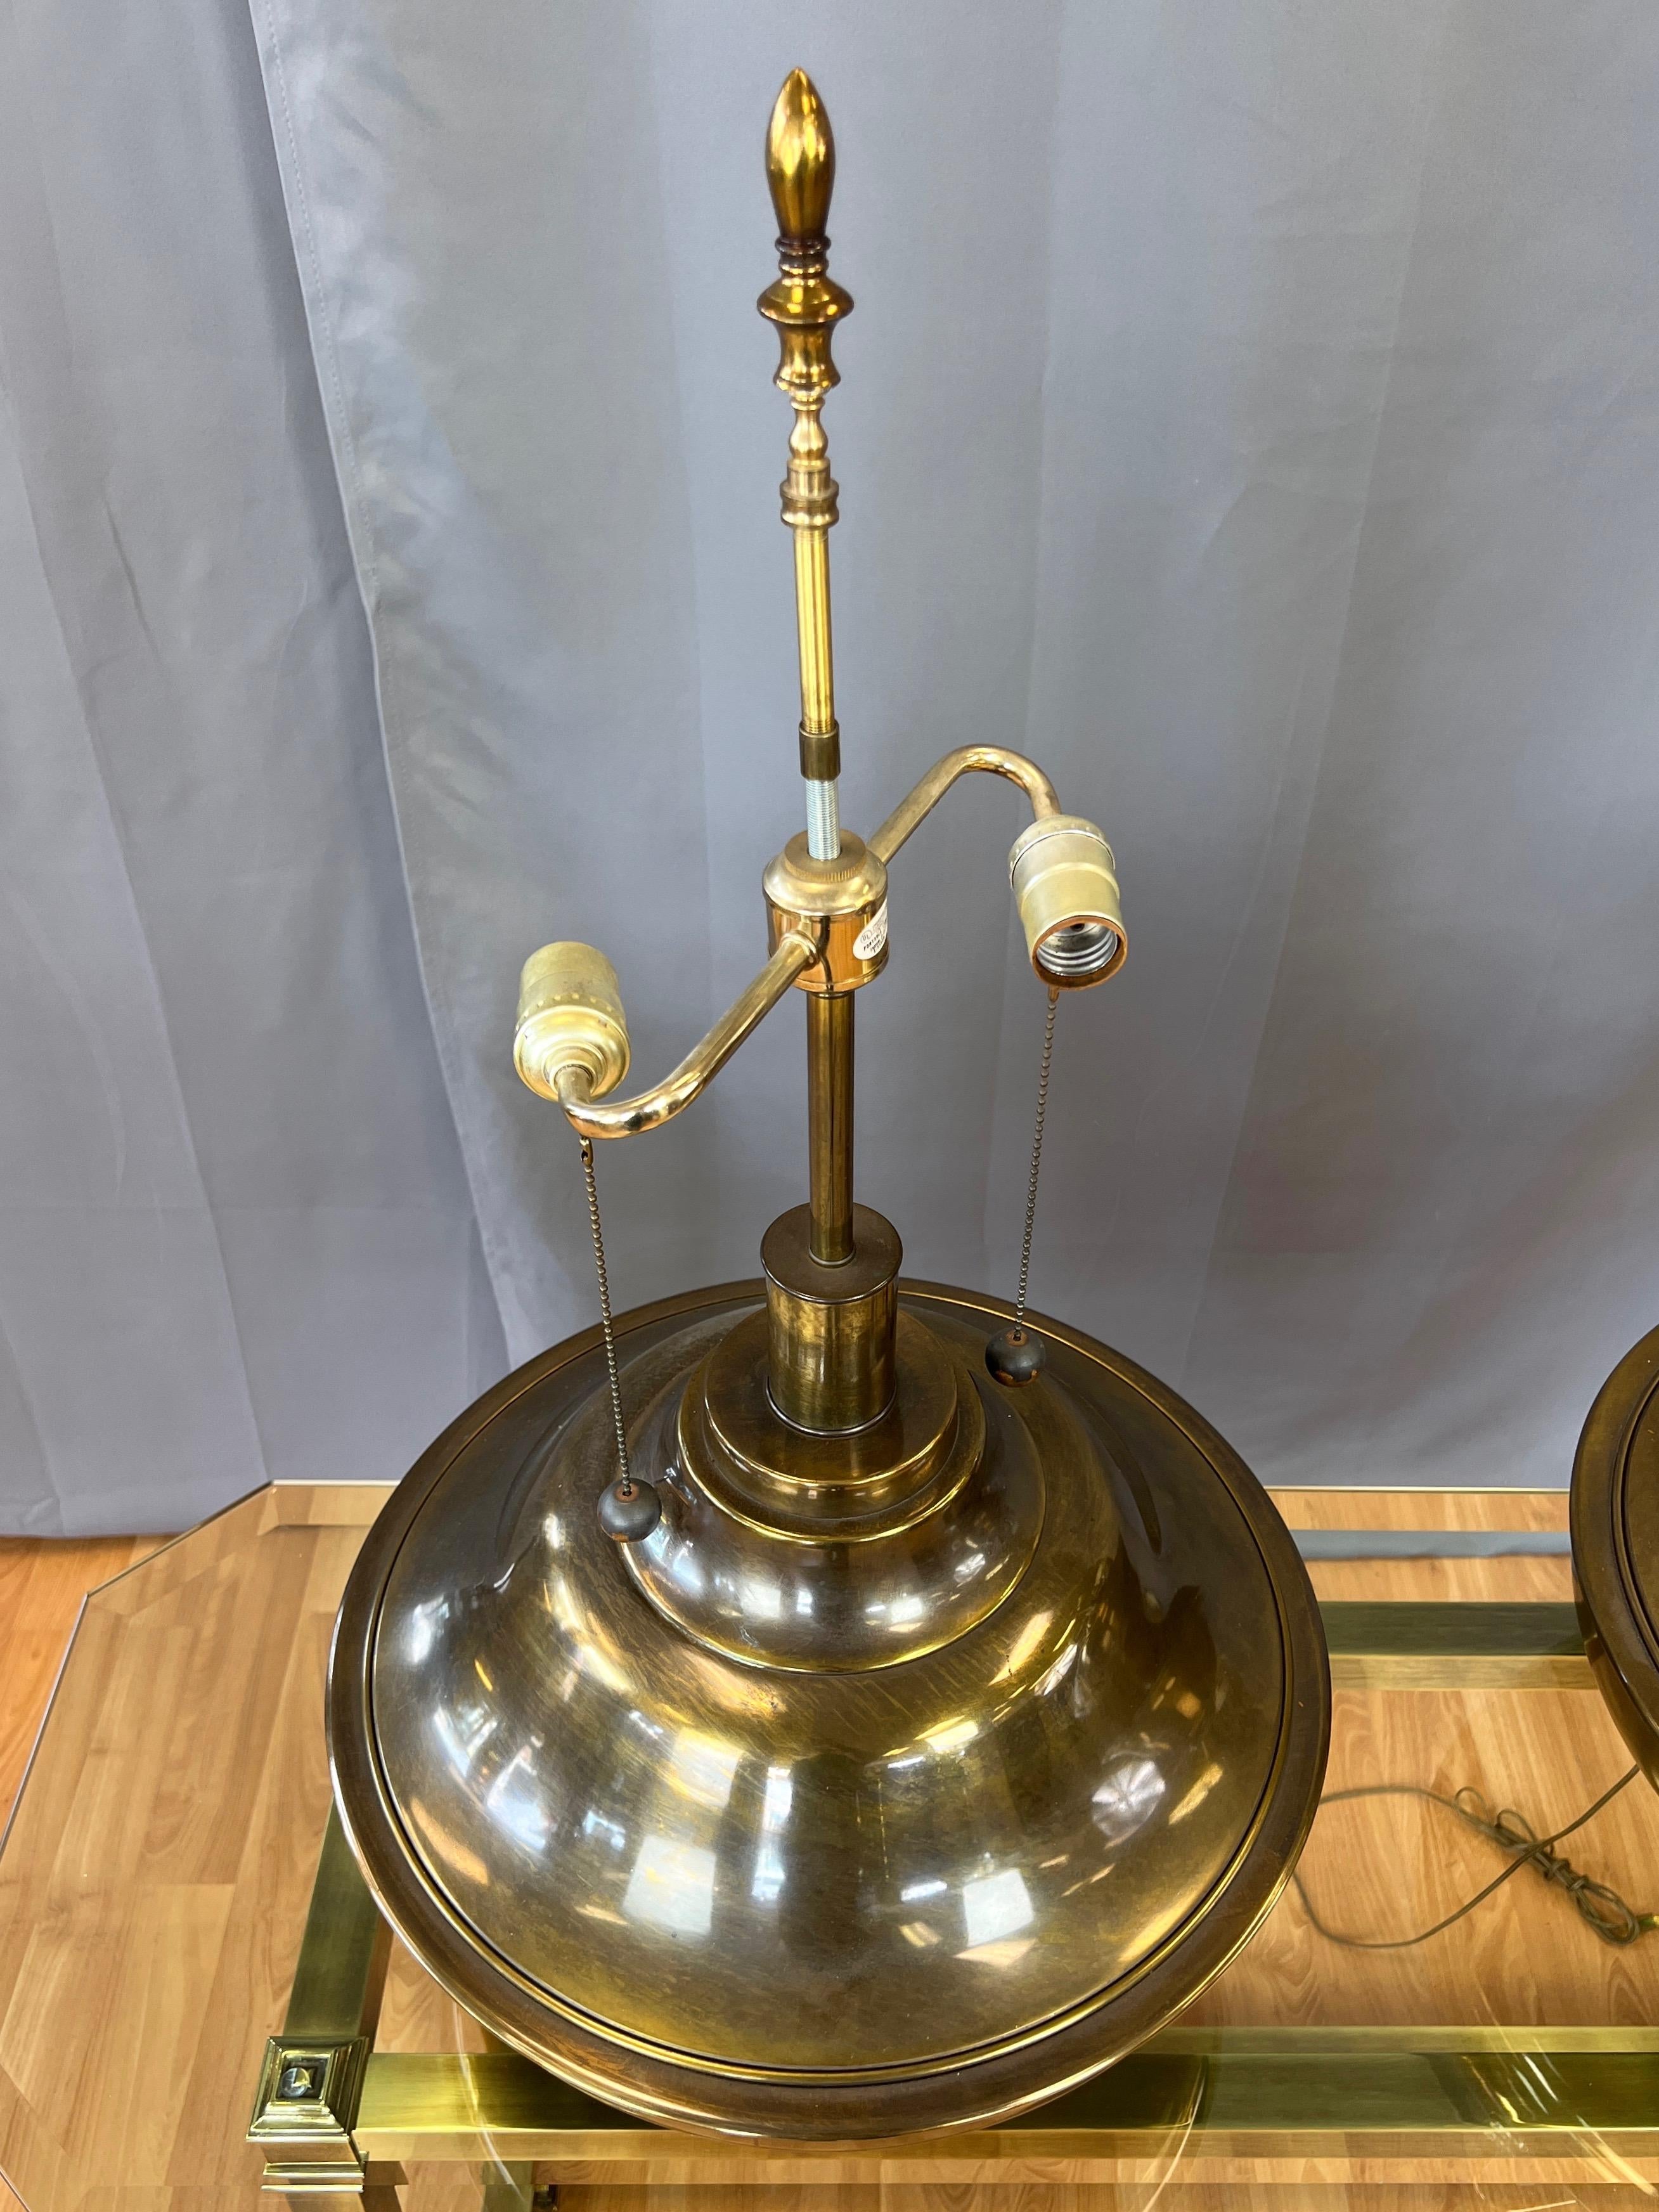 Pair of Monumental Marbro-Style Antiqued Brass Table Lamps with Shades, 1960s For Sale 4